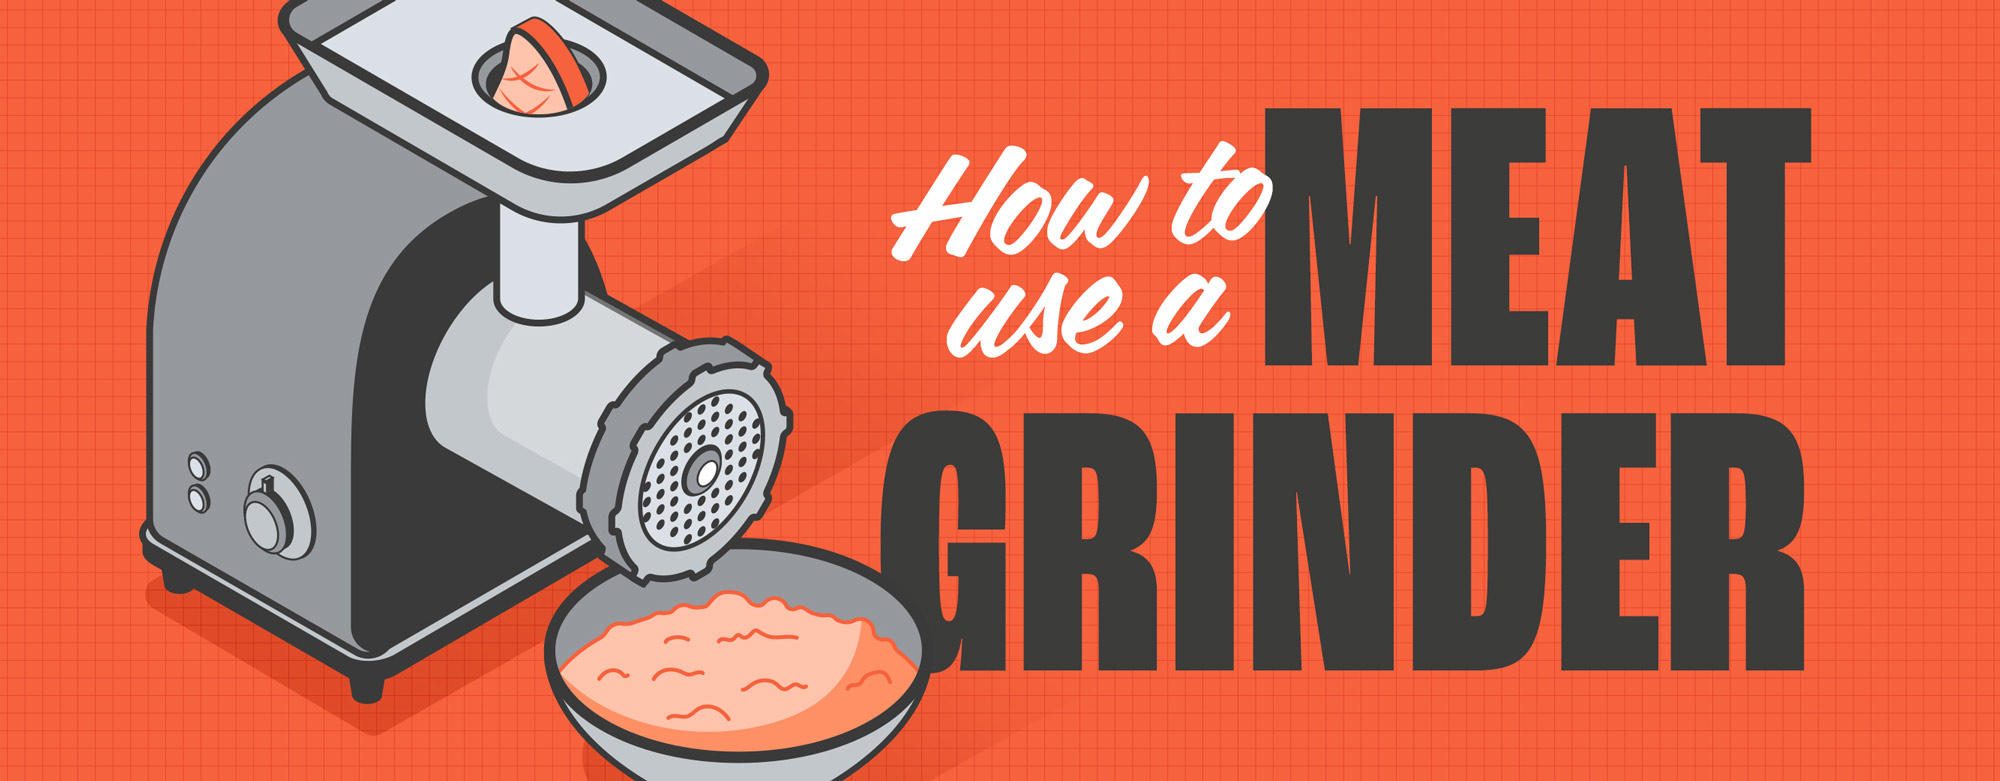 How to Use a Meat Grinder 